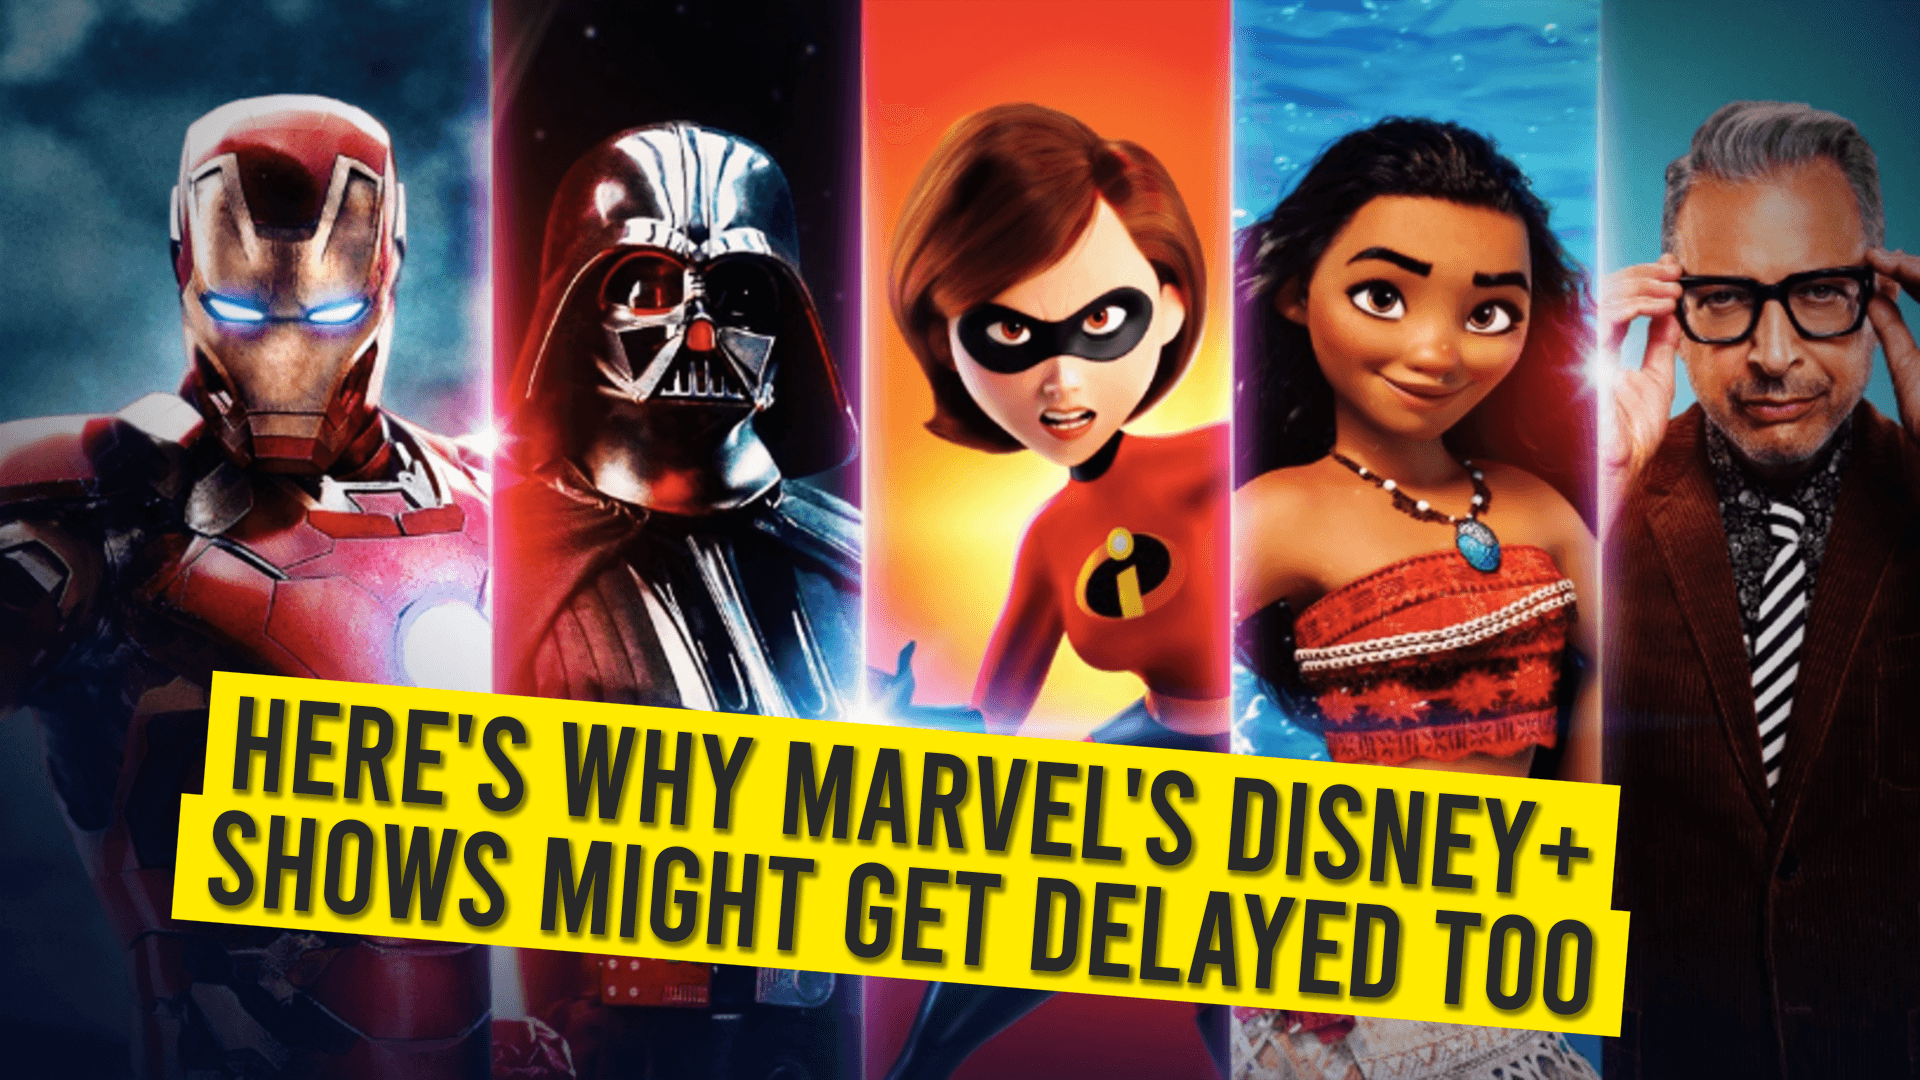 Here’s Why Marvel’s Disney+ Shows Might Get Delayed Too